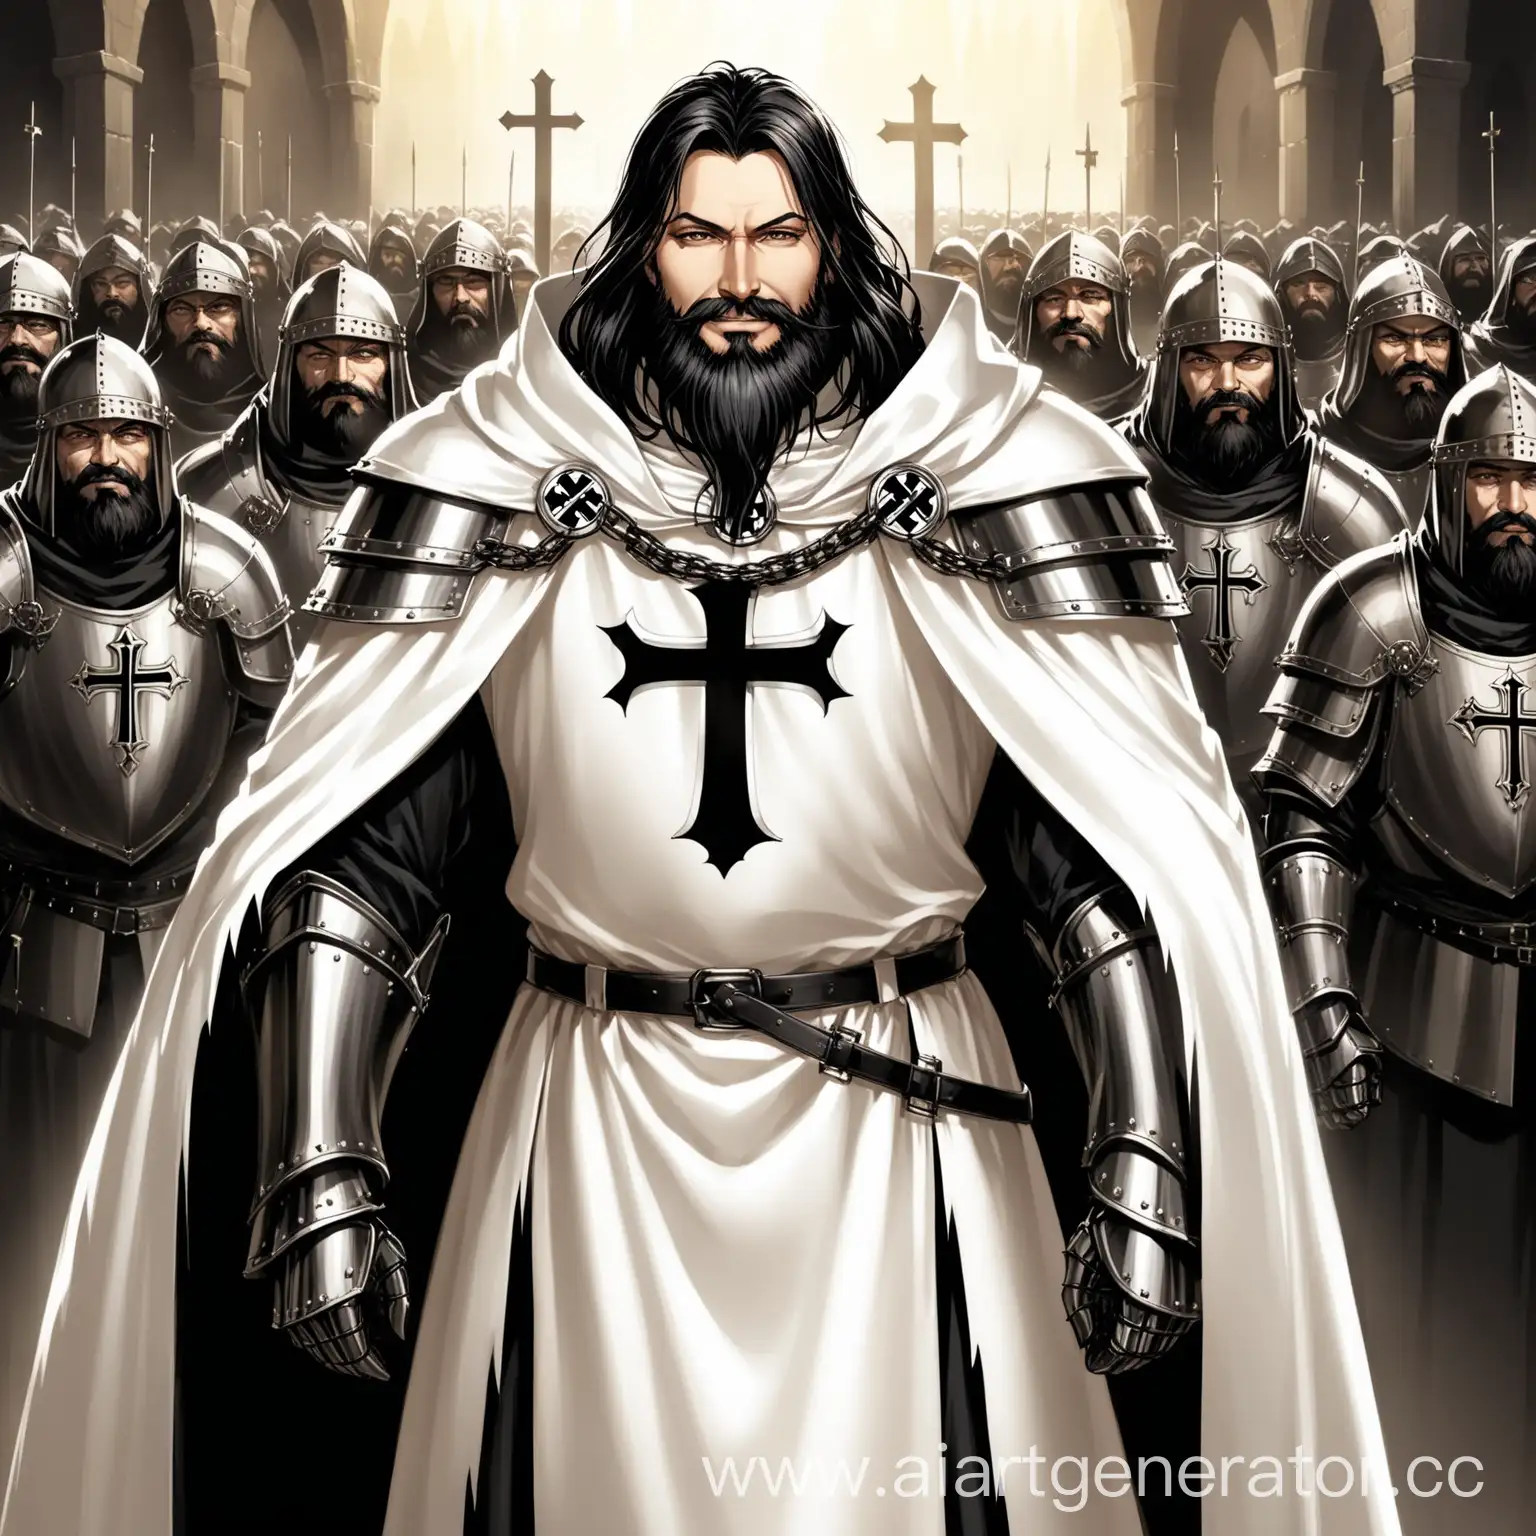 Grand-Master-of-the-Teutonic-Order-Winrich-von-Kniprode-in-14th-Century-Armor-Leading-His-Army